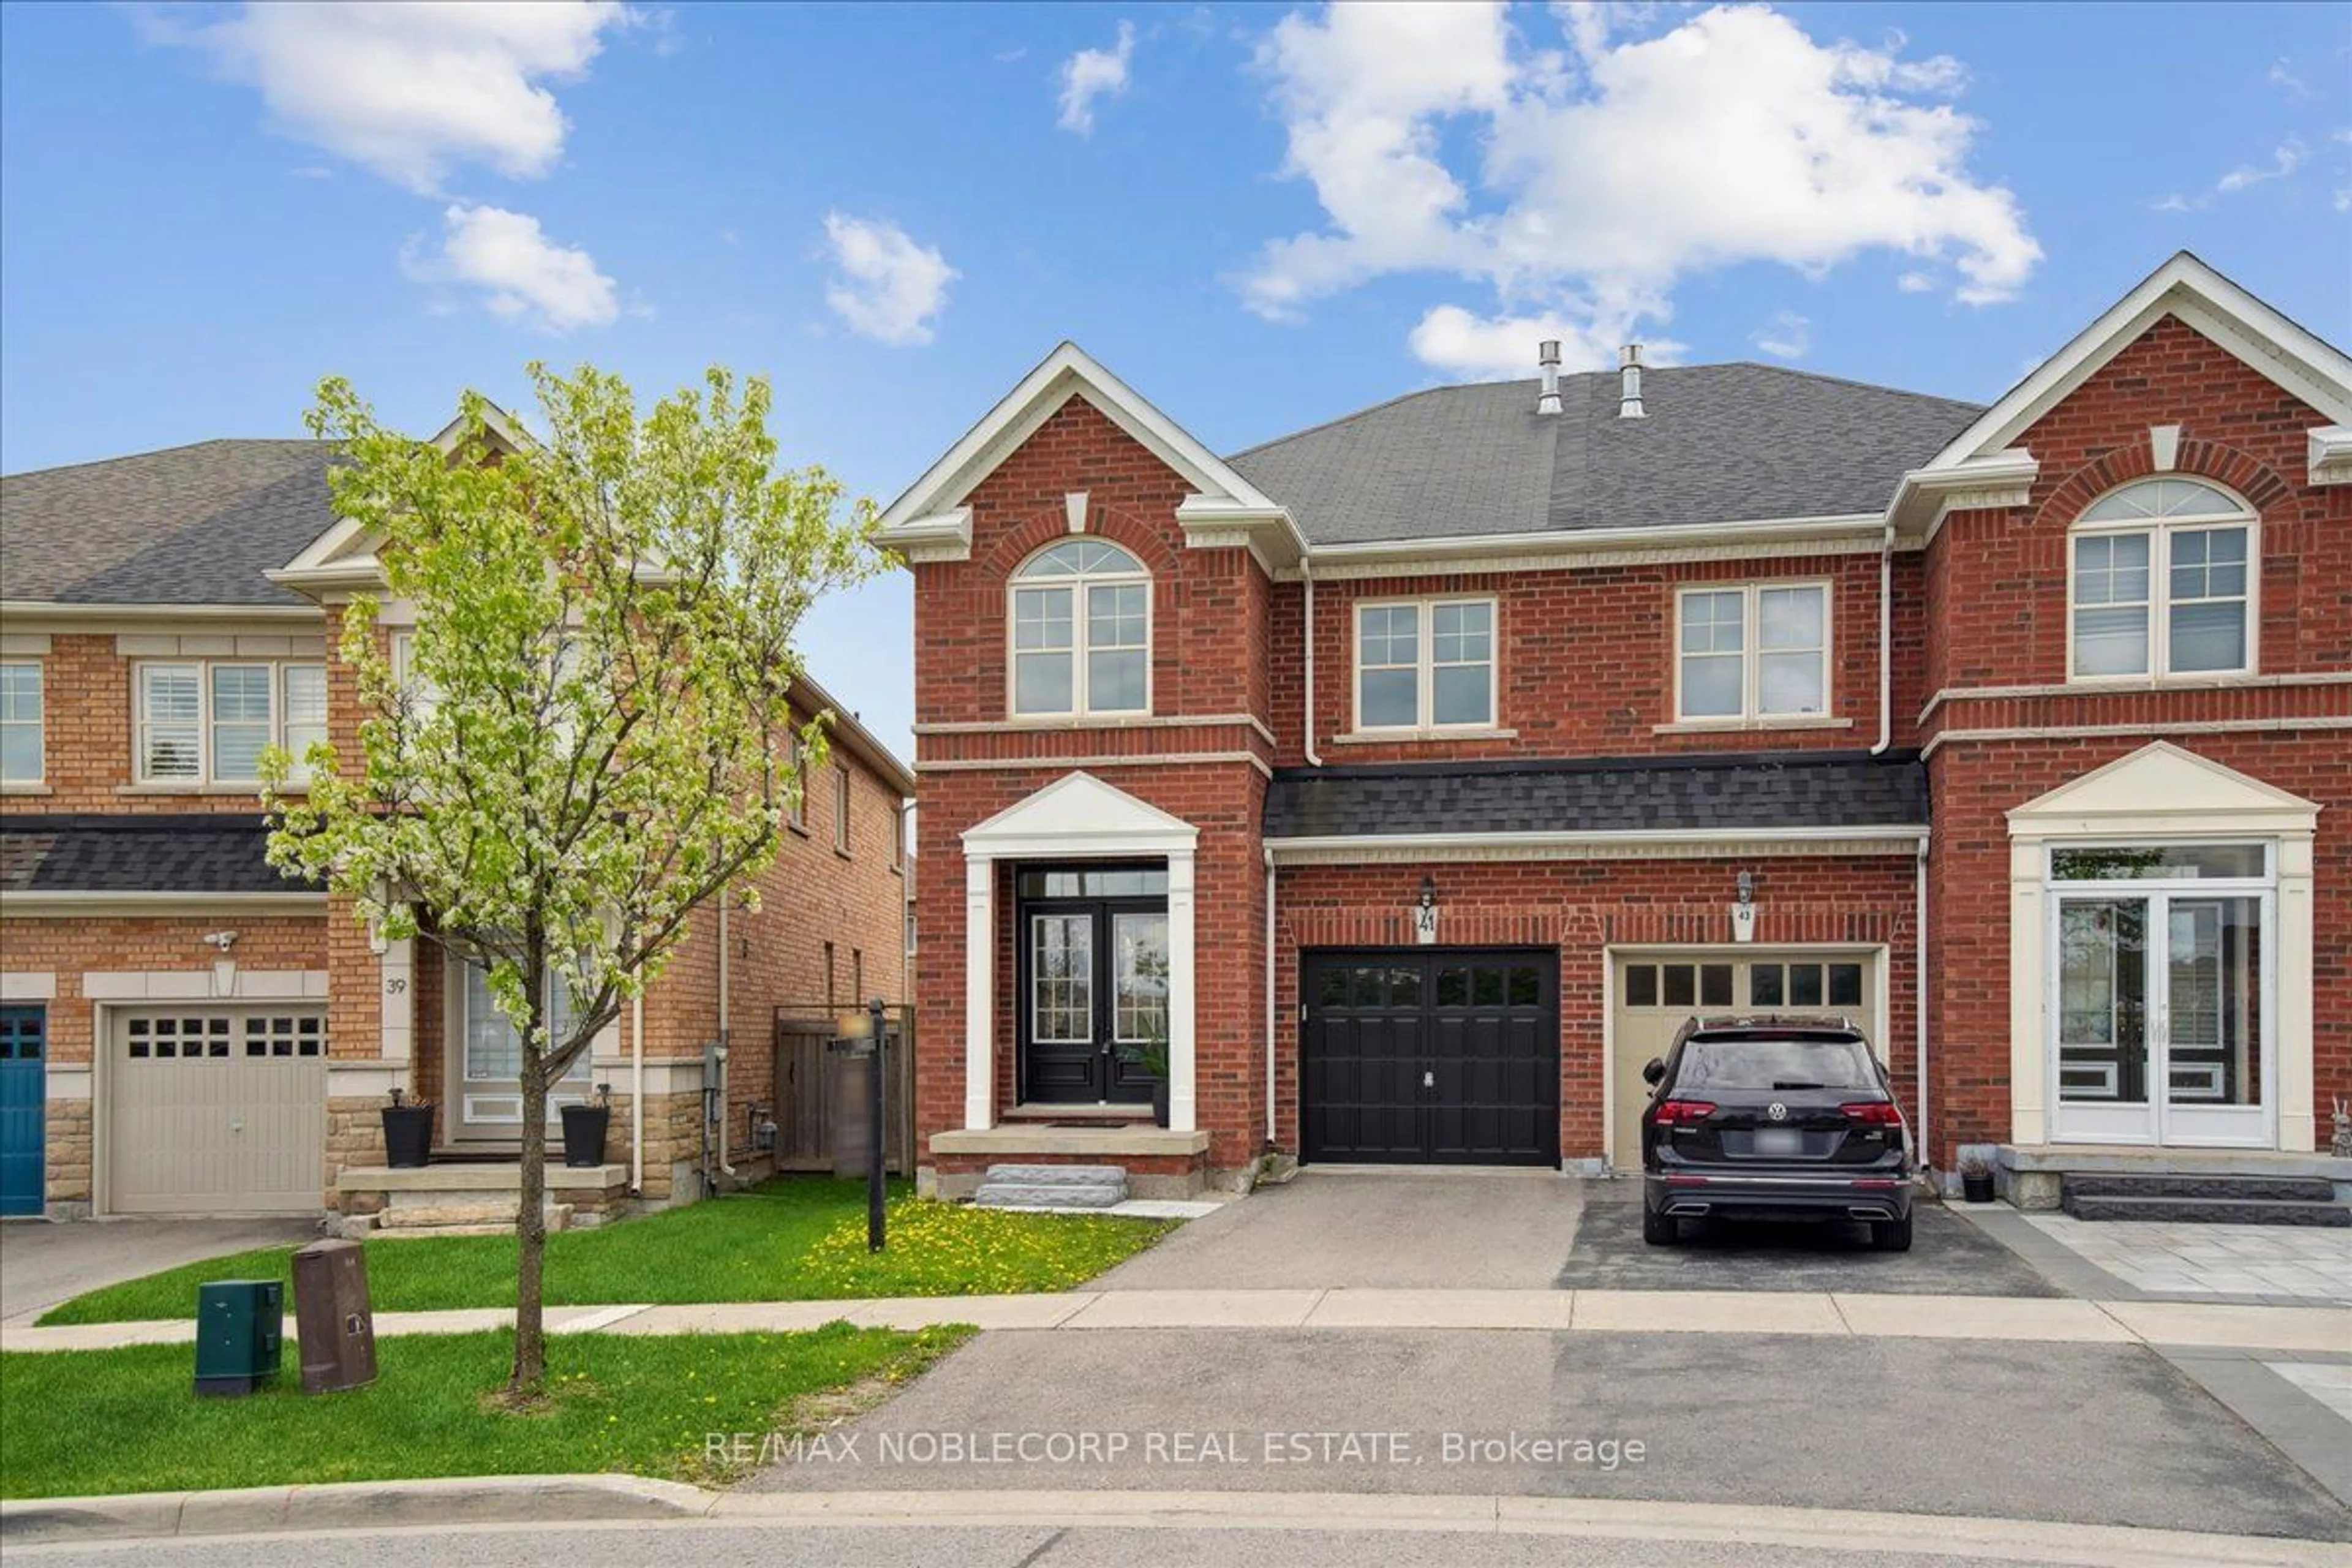 Home with brick exterior material for 41 Robert Osprey Dr, Markham Ontario L6C 0L1